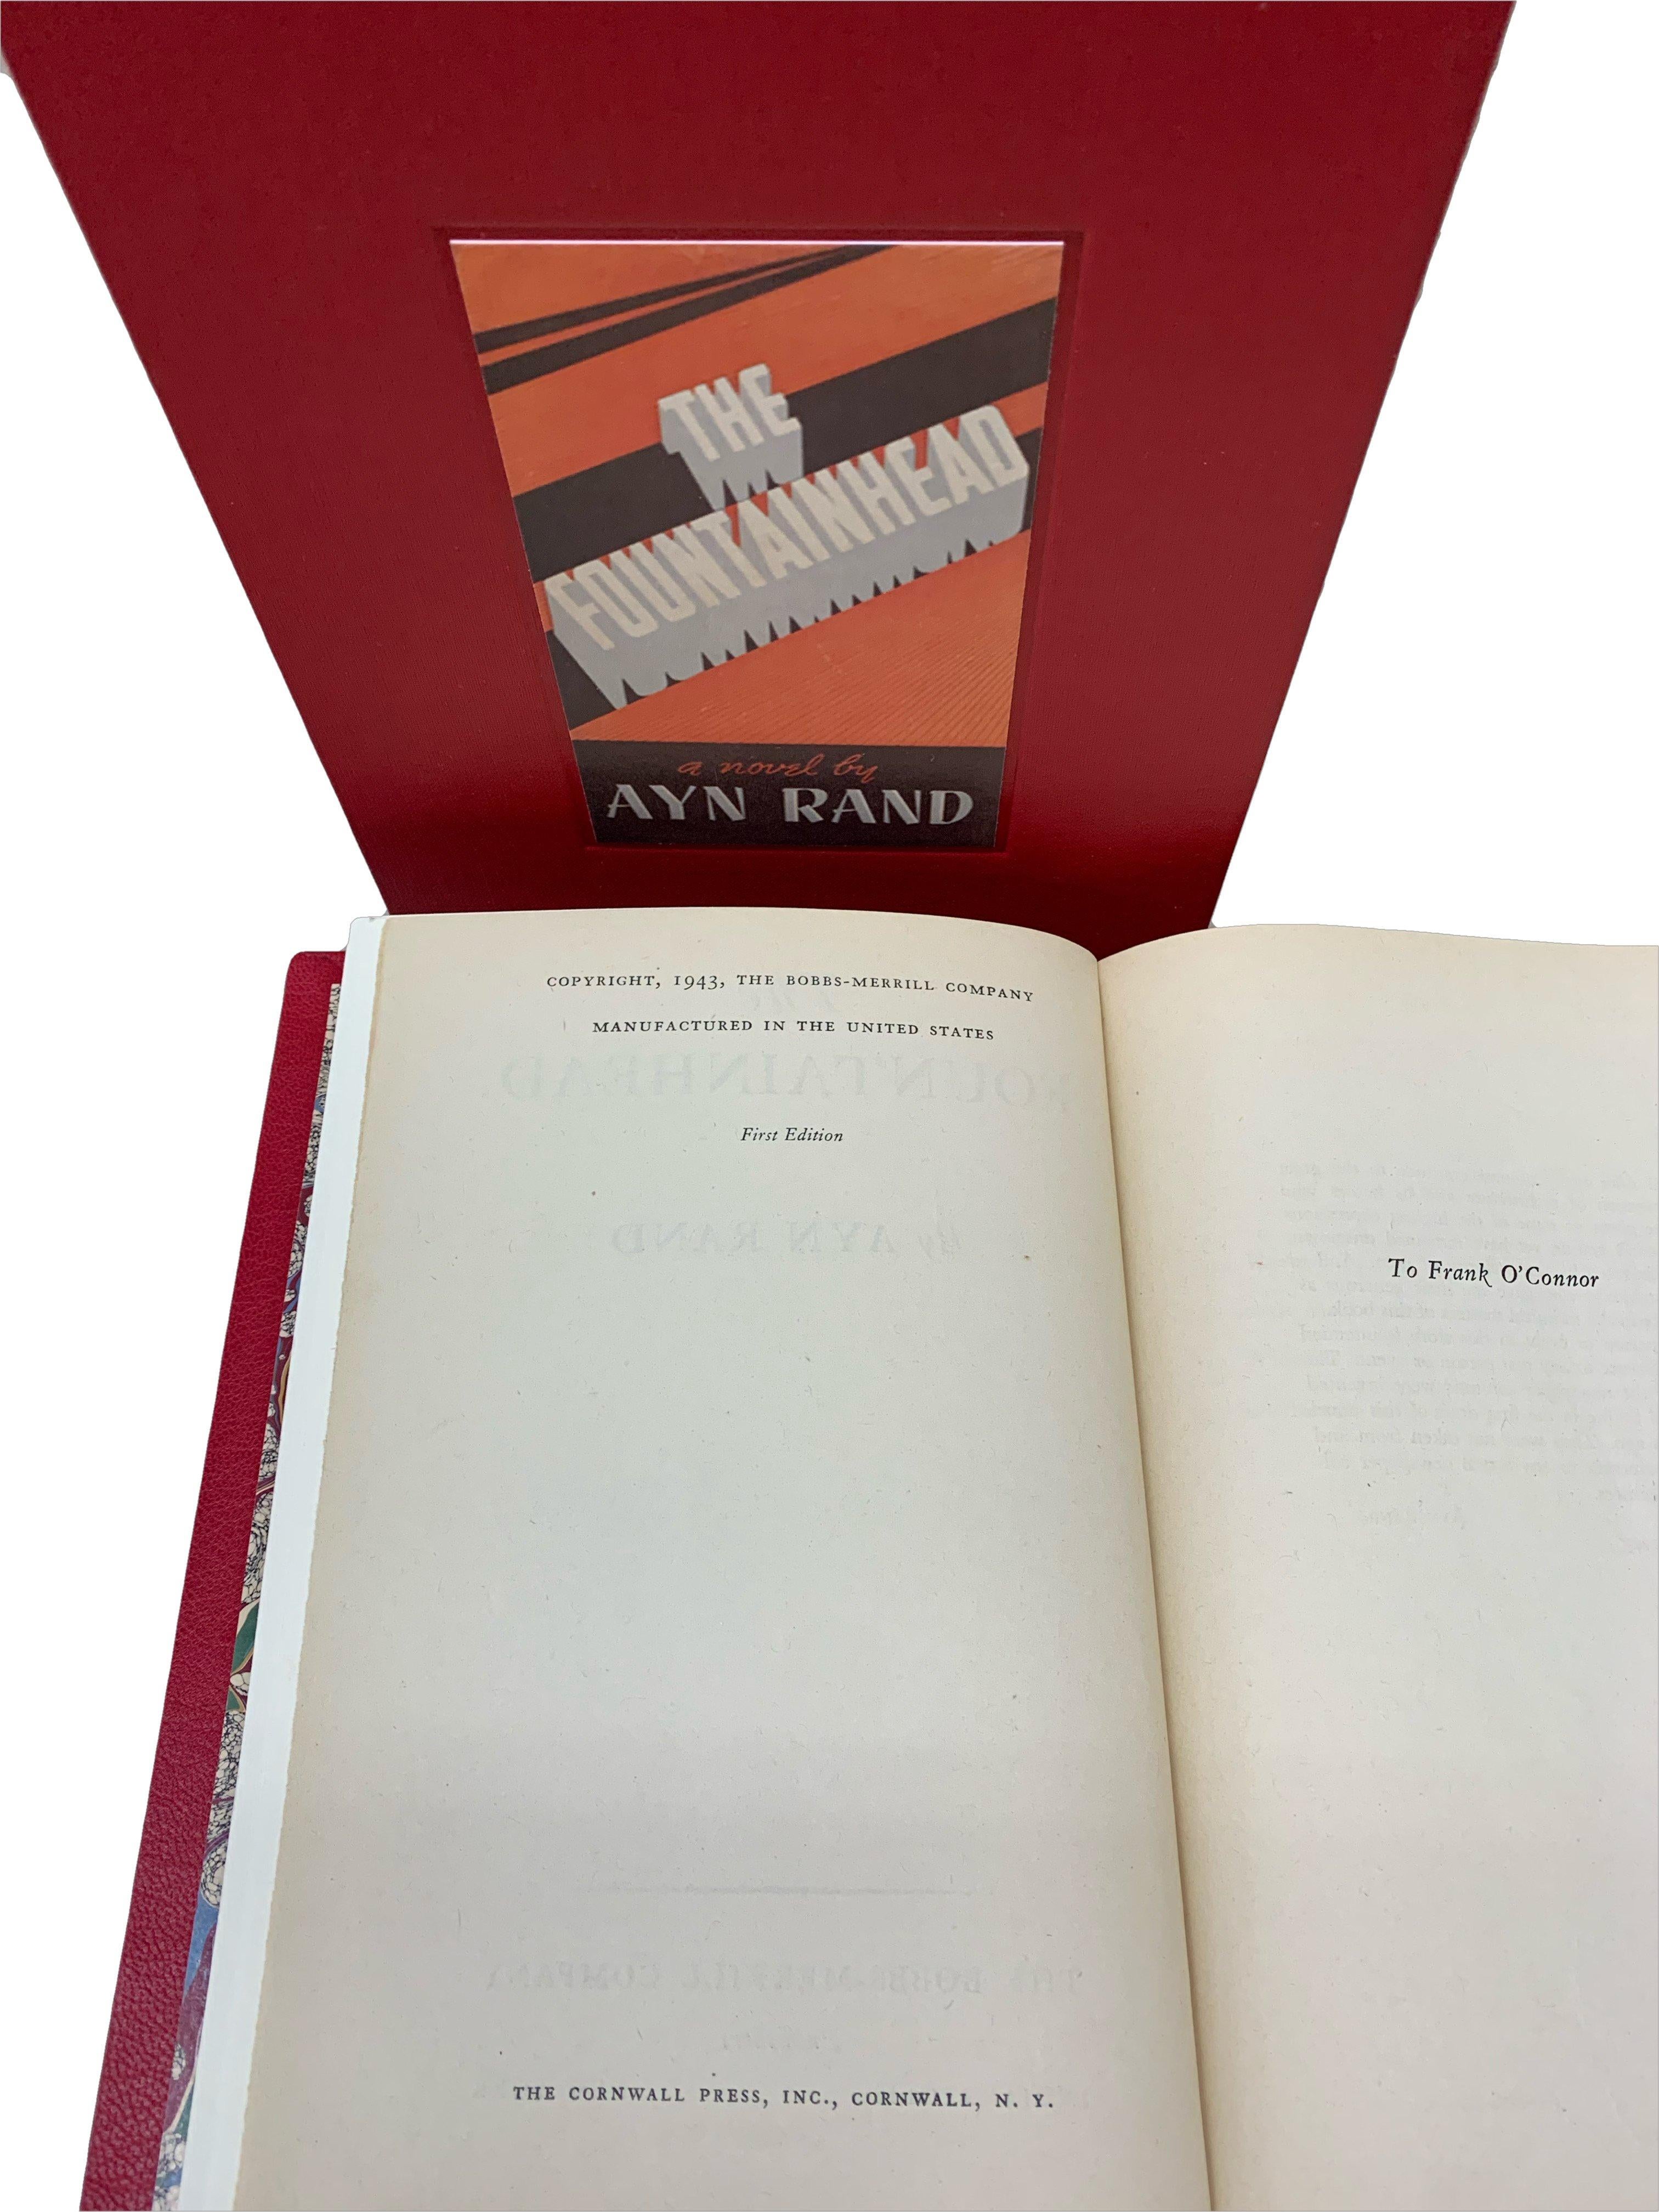 Rand, Ayn. The Fountainhead. Indianapolis: Bobbs-Merrill, 1943. First edition, first state. Octavo. Rebound in full red Moroccan leather with Rand's facsimile signature gilt embossed on front. Raised bands, gilt stamps, and titles to spine. With a